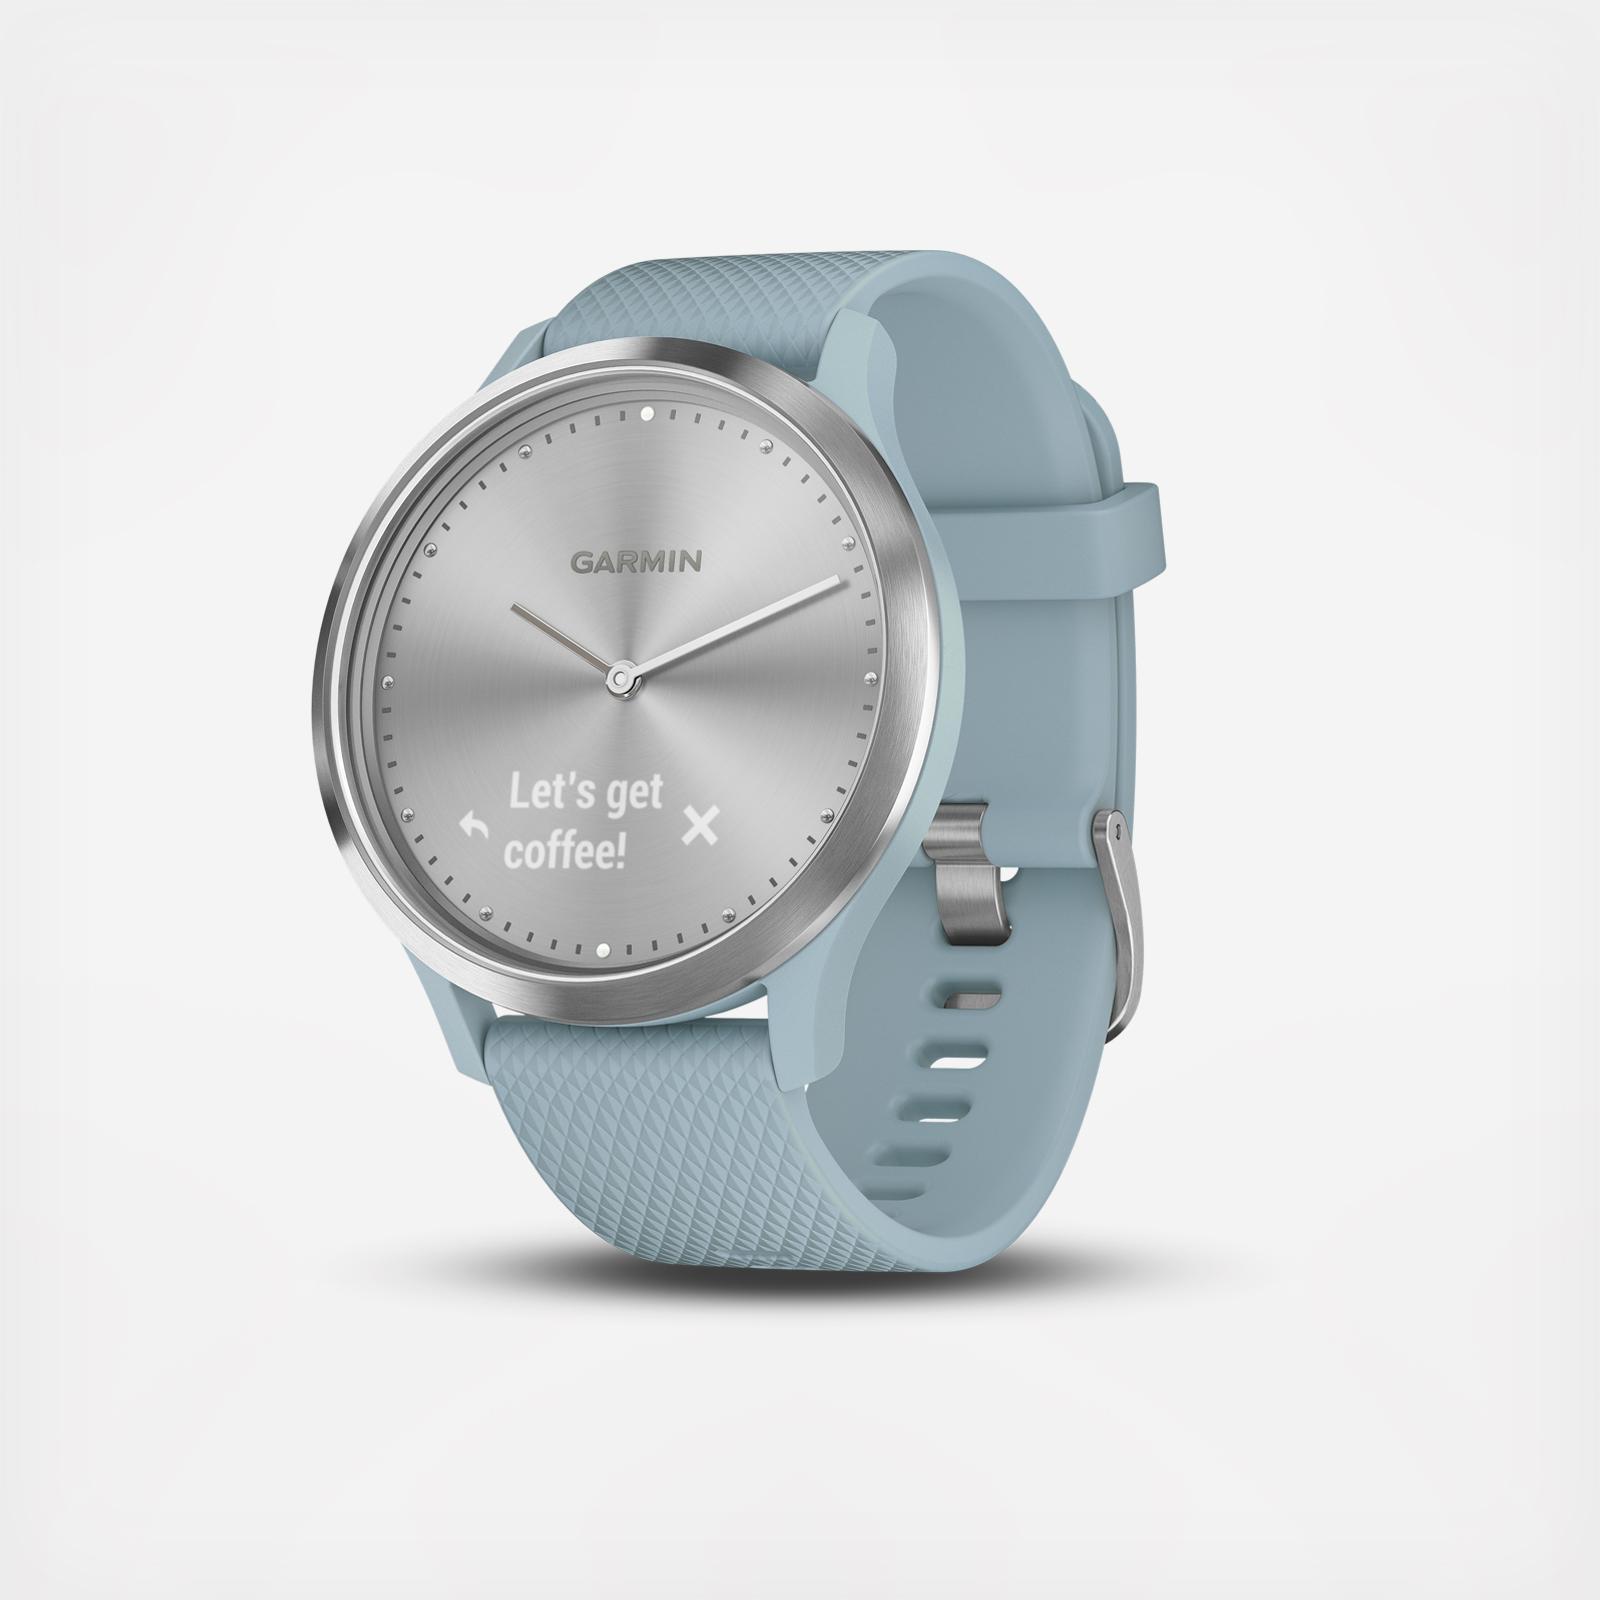 VIVOMOVE STYLE (Problems & Best Features after 1 Month of Daily Use) - New  Garmin Hybrid Smartwatch 